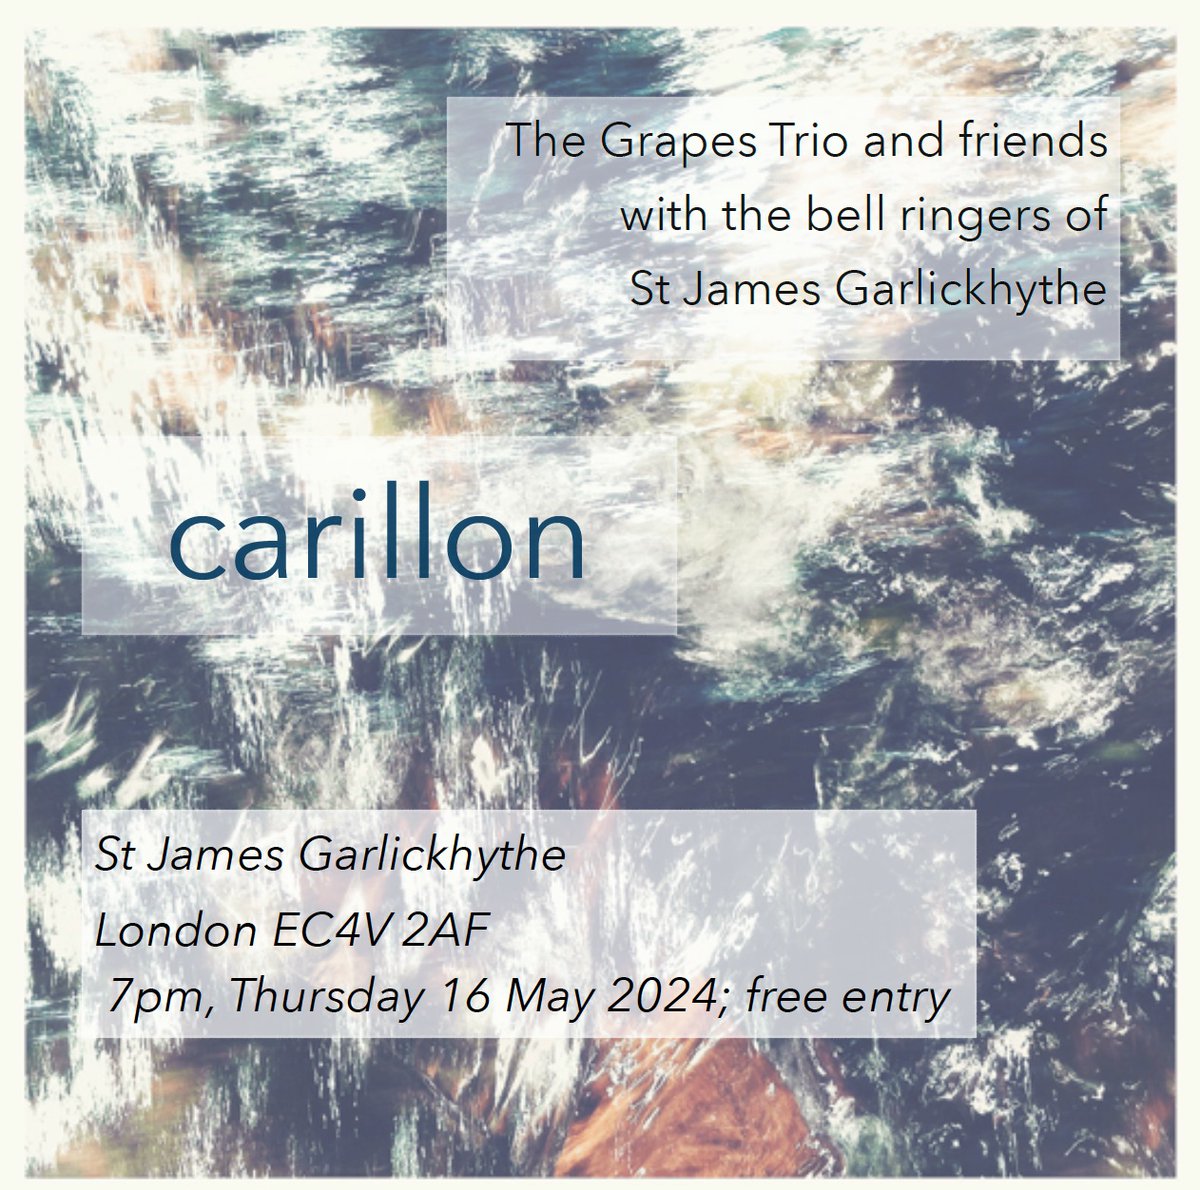 A reminder of the Grapes Trio open call for musicians, soundandmusic.org/oppo.../the-gr… If you would like to join, please contact by DM. All instruments are welcome. 7pm, 16 May, St James Garlickhythe, London